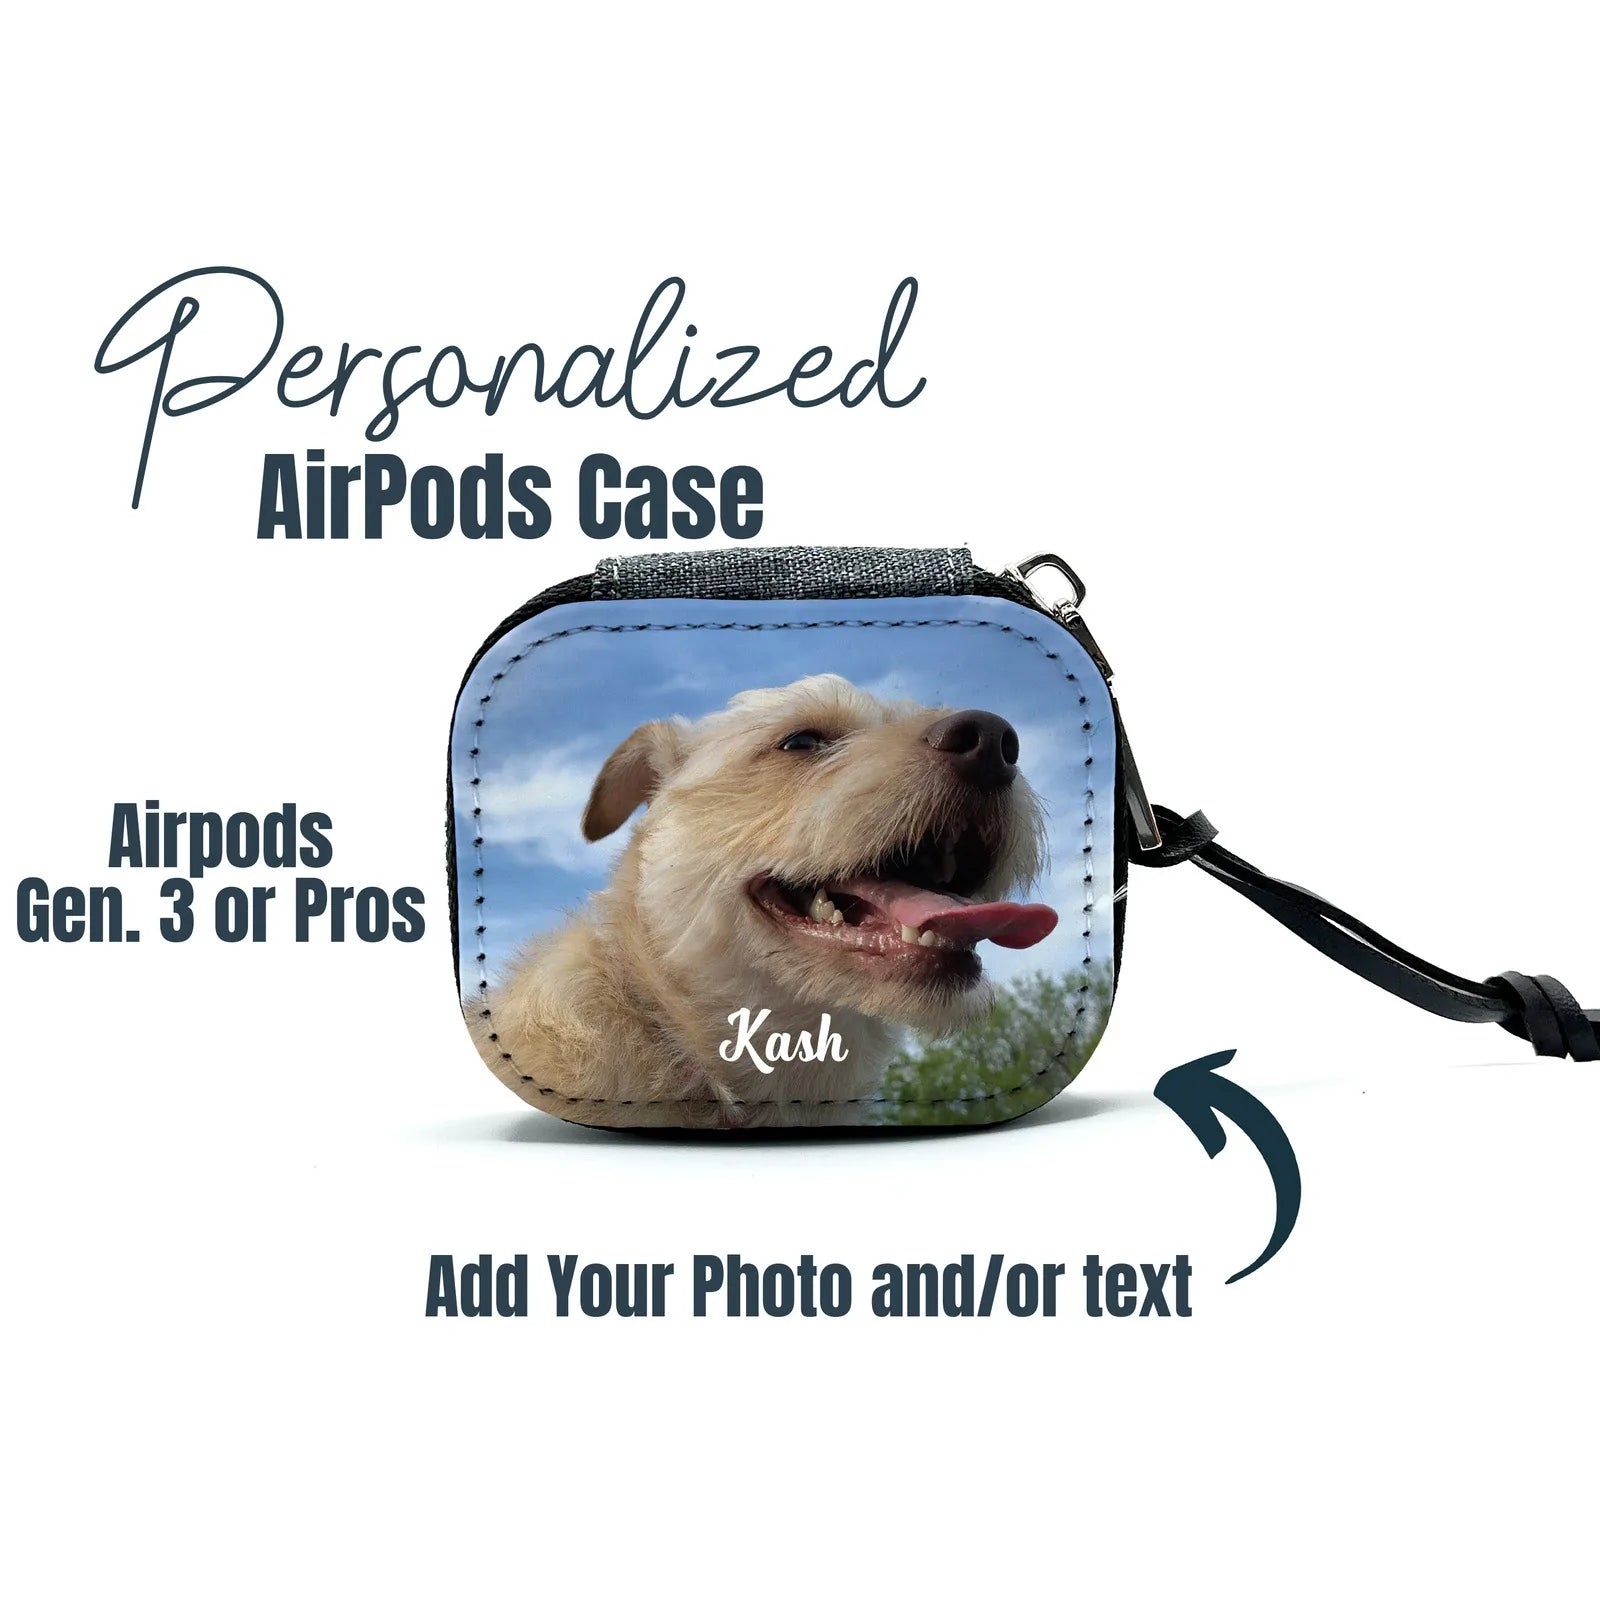 Personalized AirPods Pro and AirPods 3rd Generation Zipper Cases